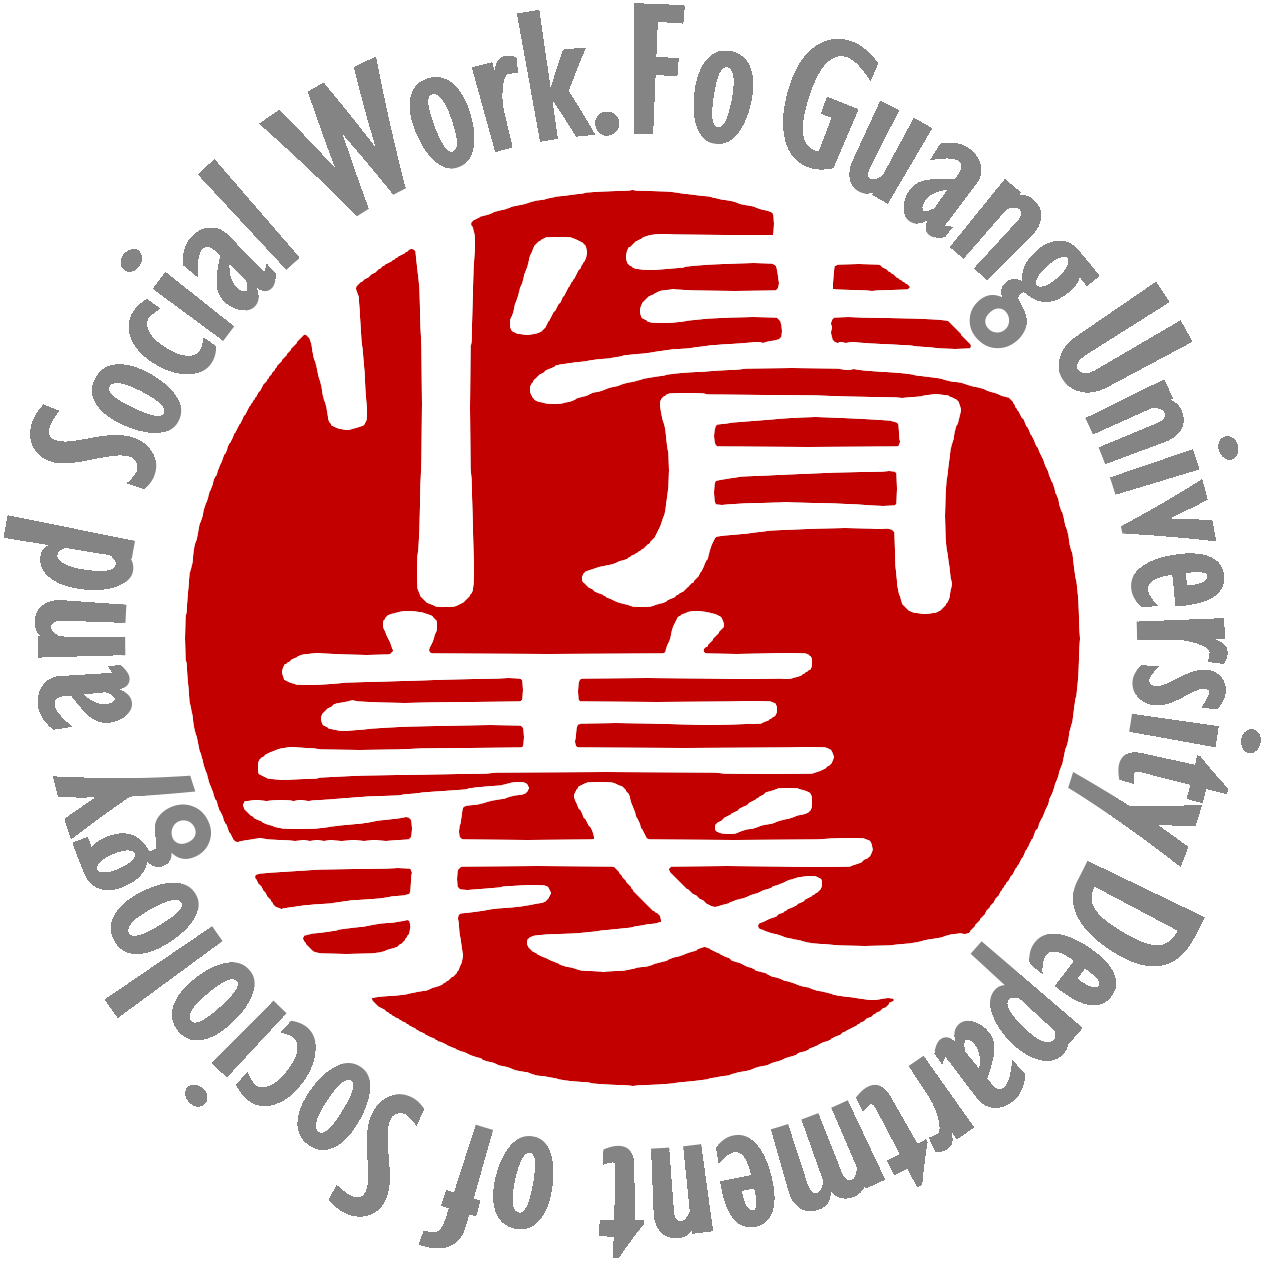  this is Department of Sociology and Social Work, FGU logo